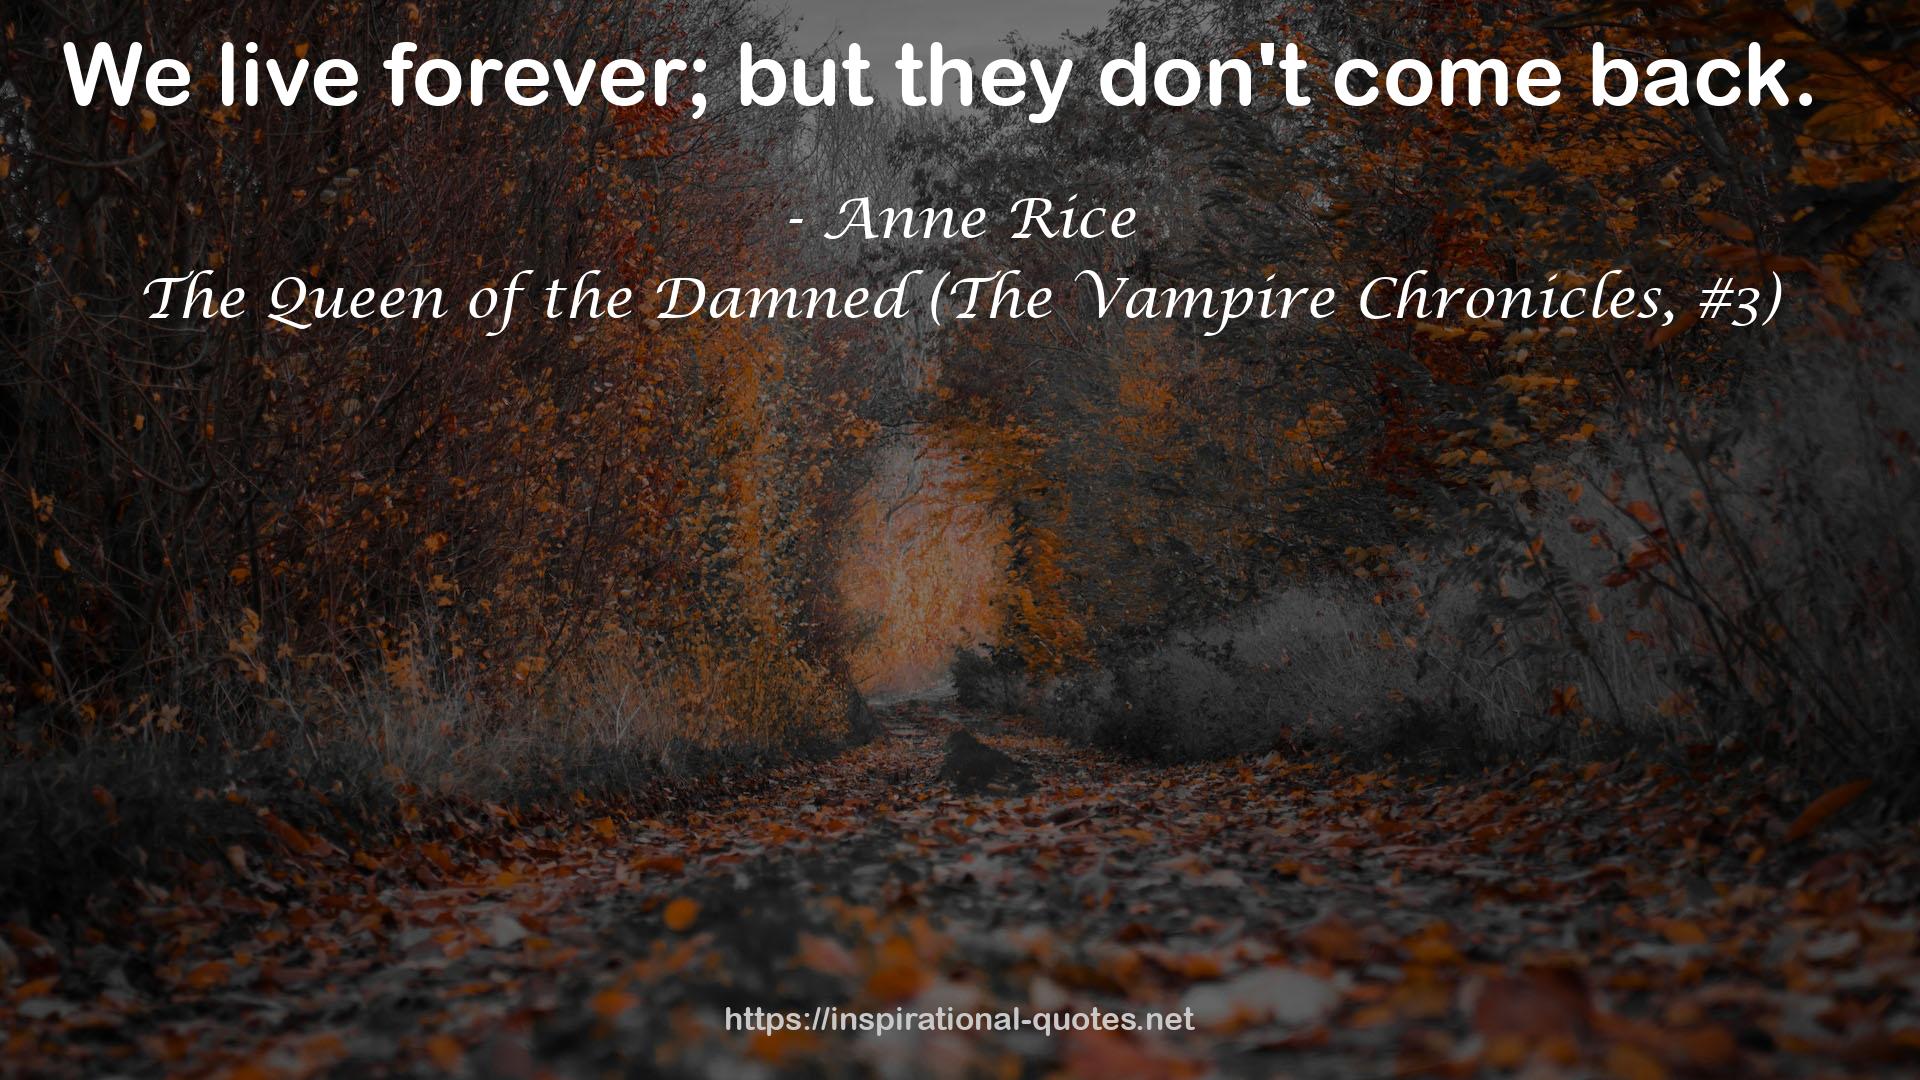 The Queen of the Damned (The Vampire Chronicles, #3) QUOTES